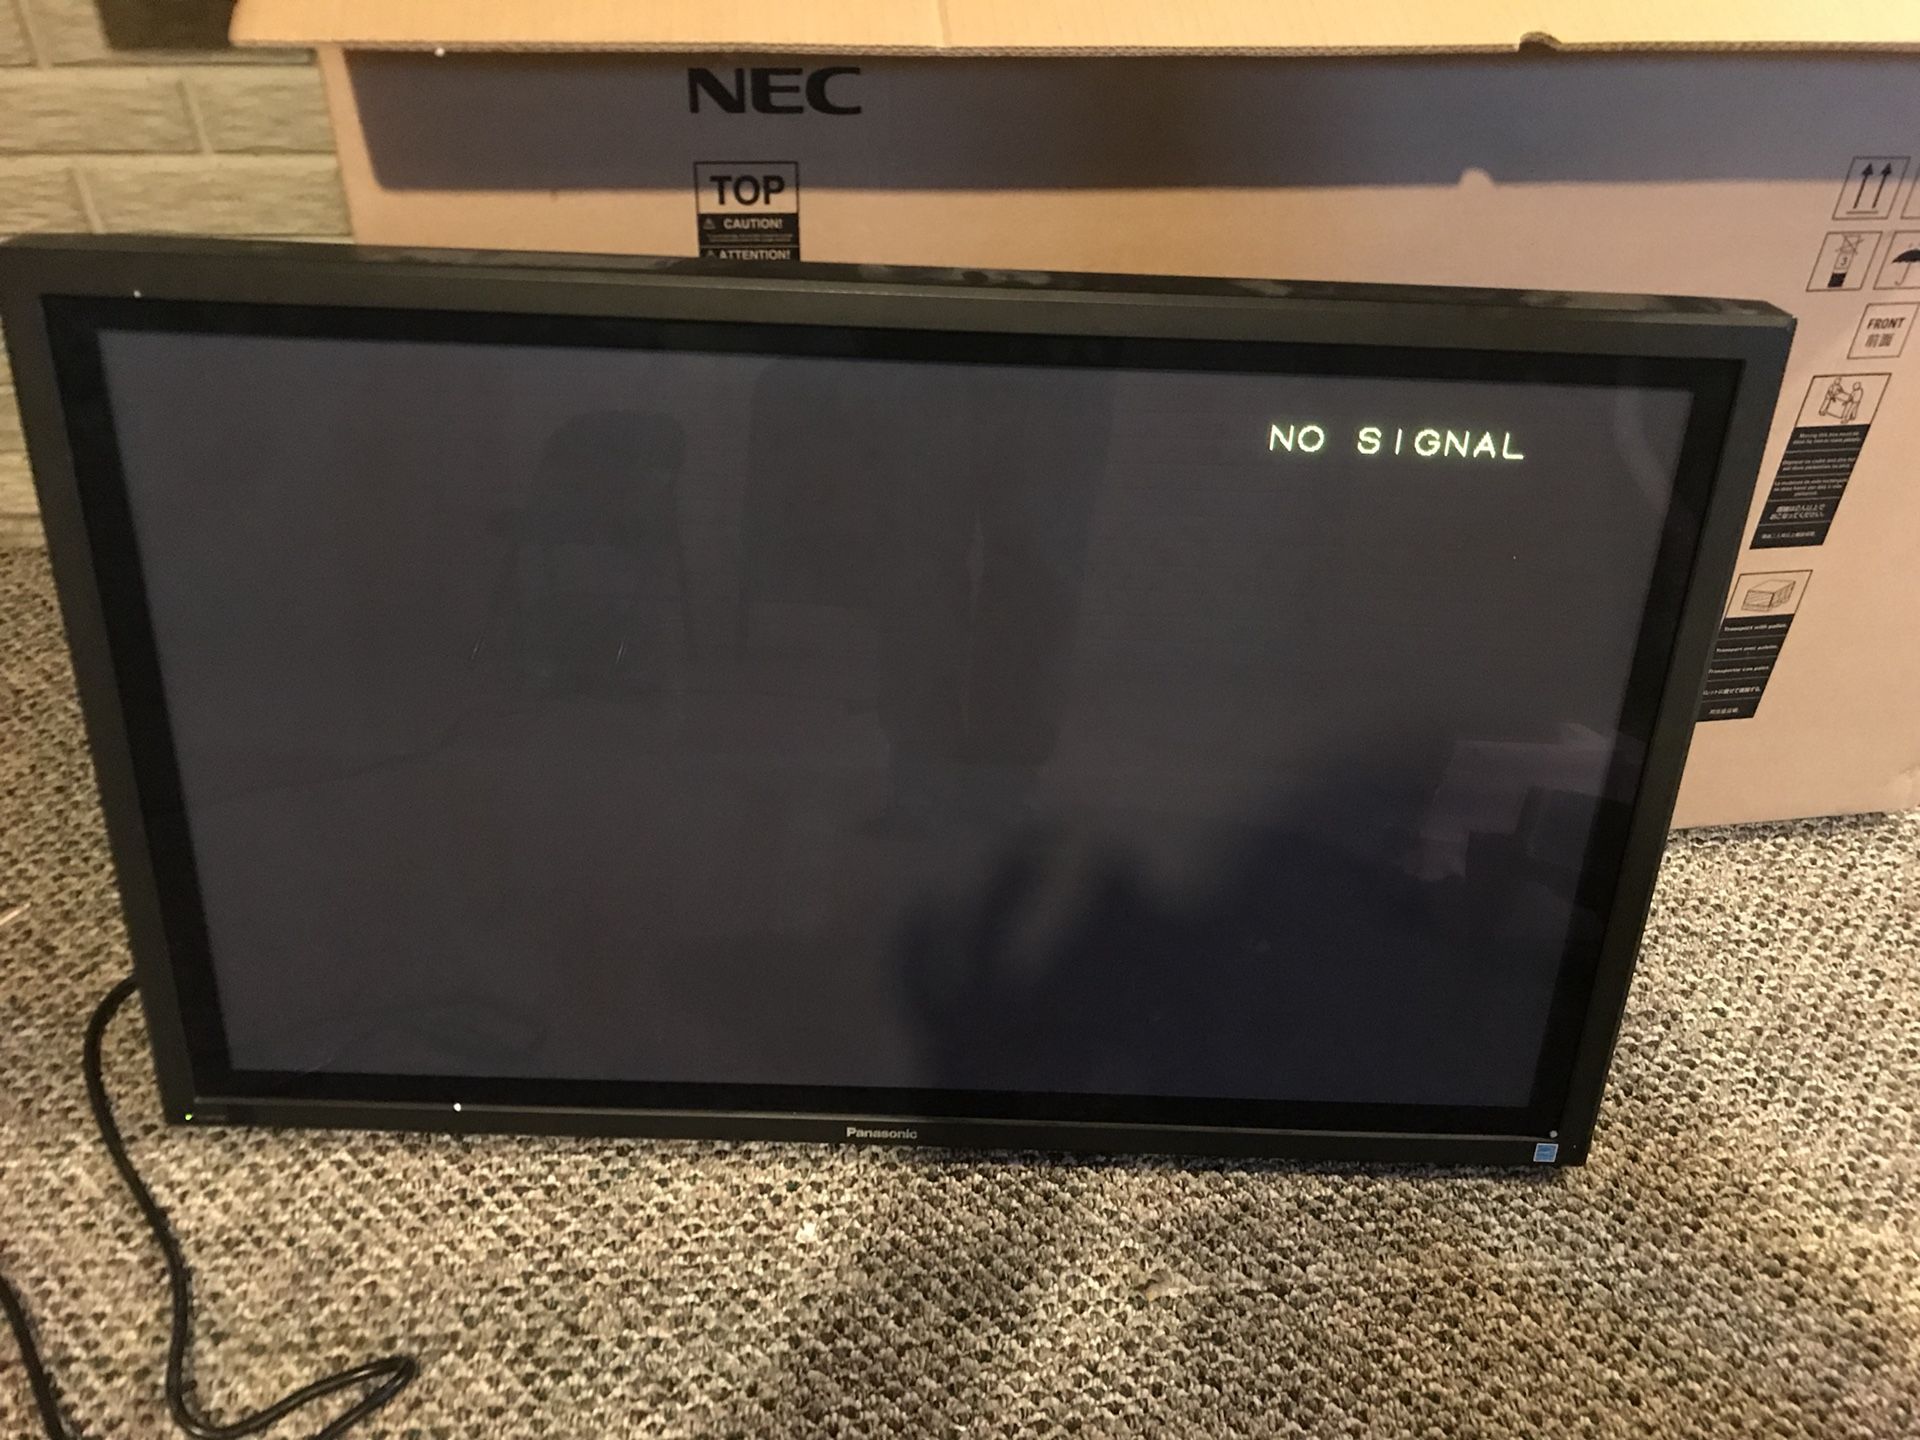 Used Panasonic TH-42PWD8 working plasma monitor. Picture says no signal but does work. If truly interested I will send